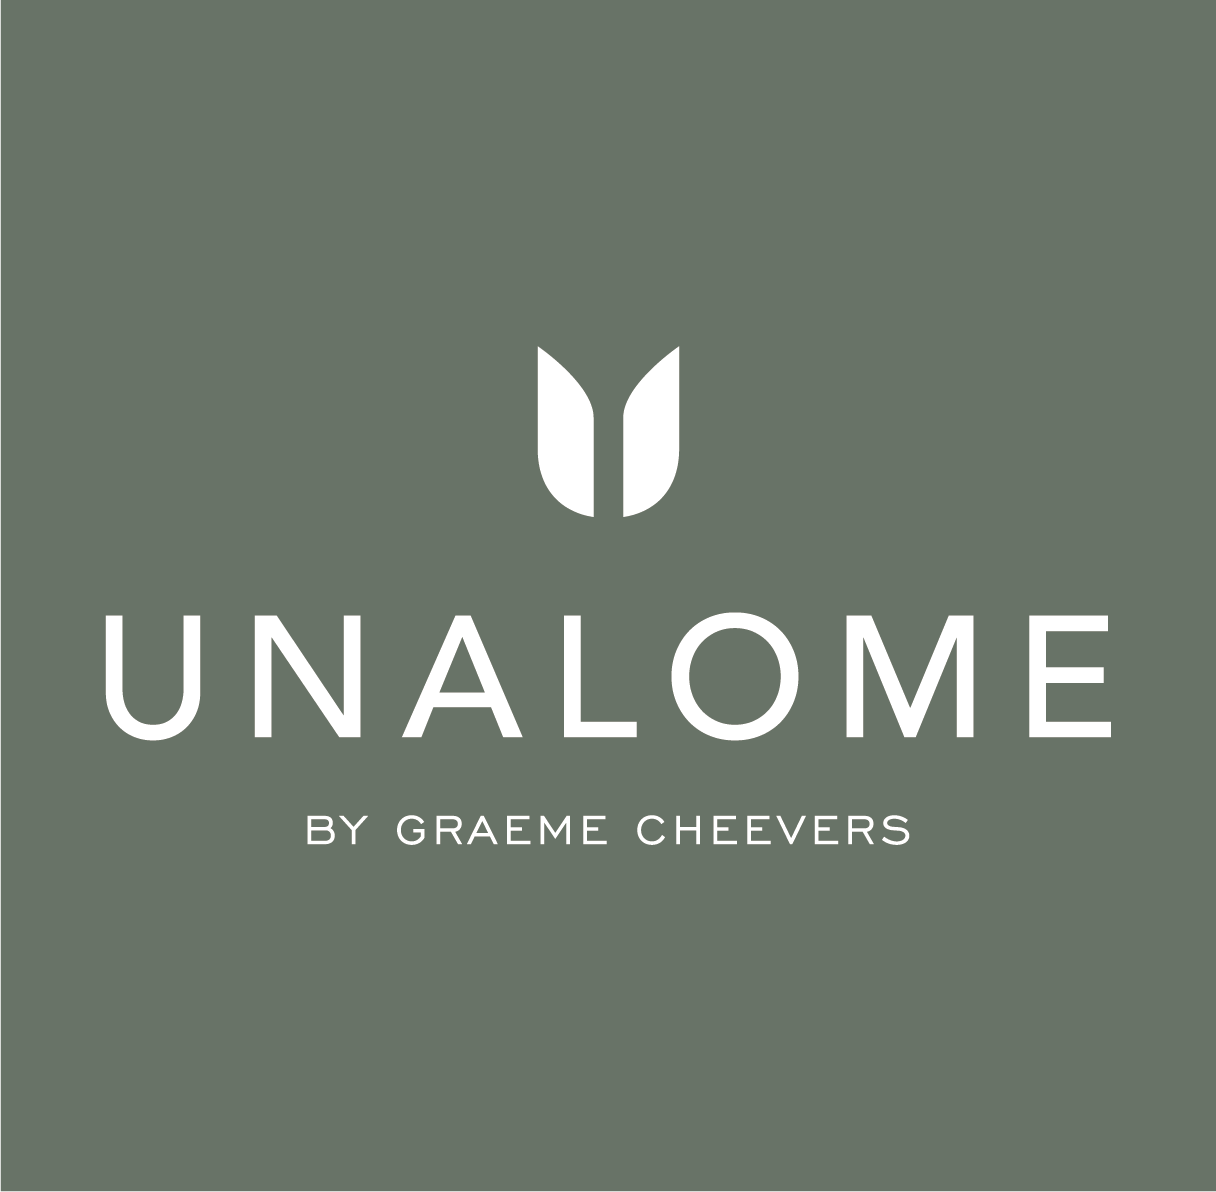 UNALOME by Graeme Cheevers